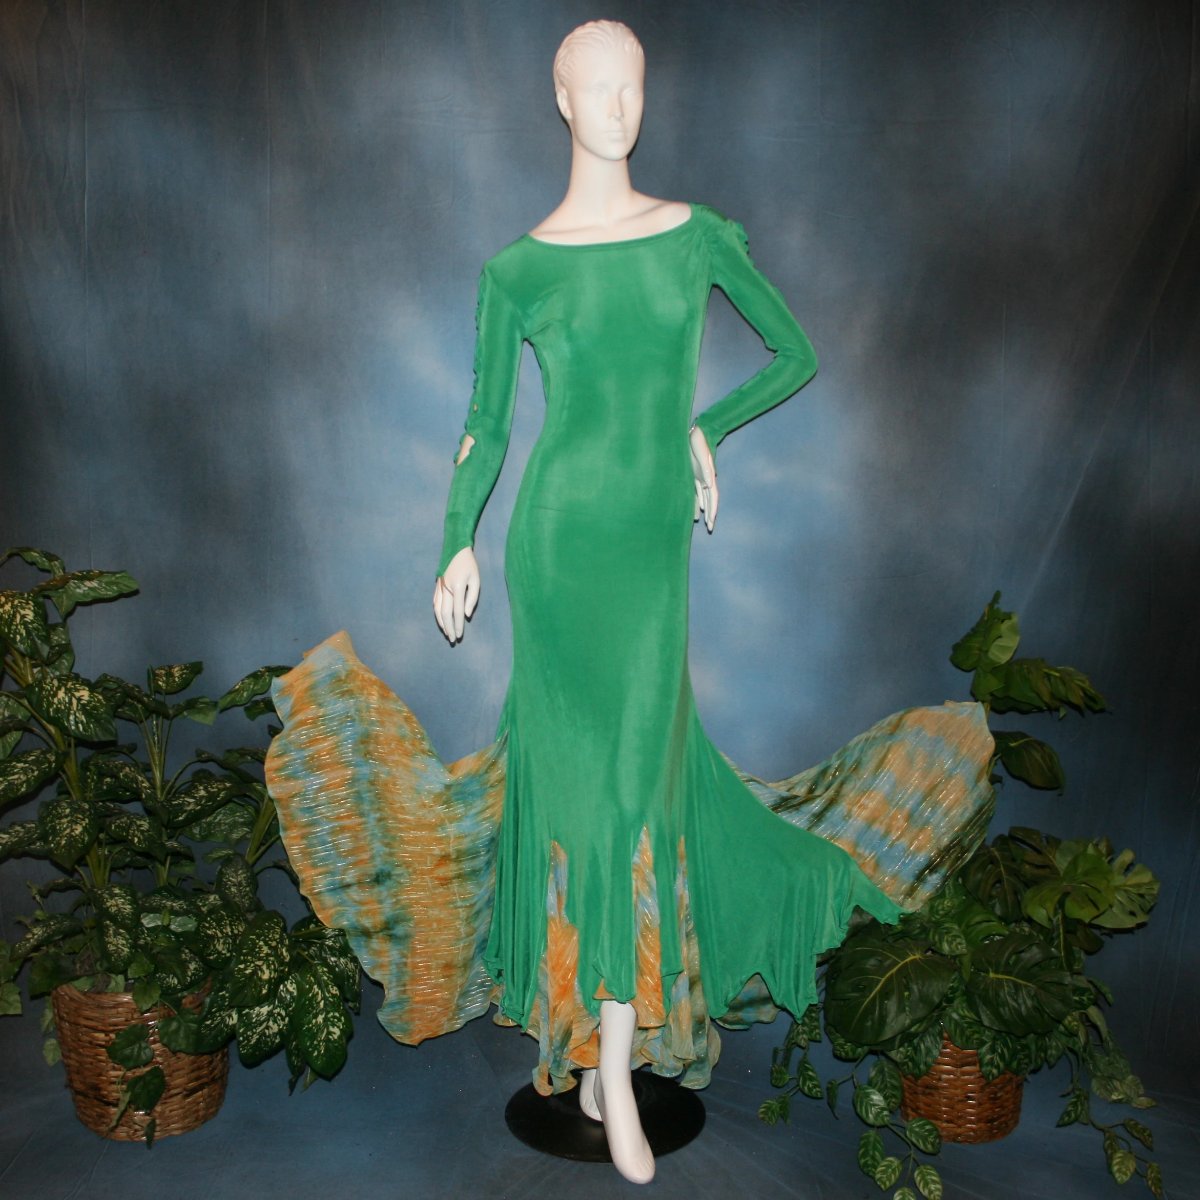 Gorgeous green ballroom dress created in luxurious solid slinky fabric with printed chiffon of greens, with gold accents insets. Very full around bottom...can be a beginner ballroom dancer smooth or standard dress.